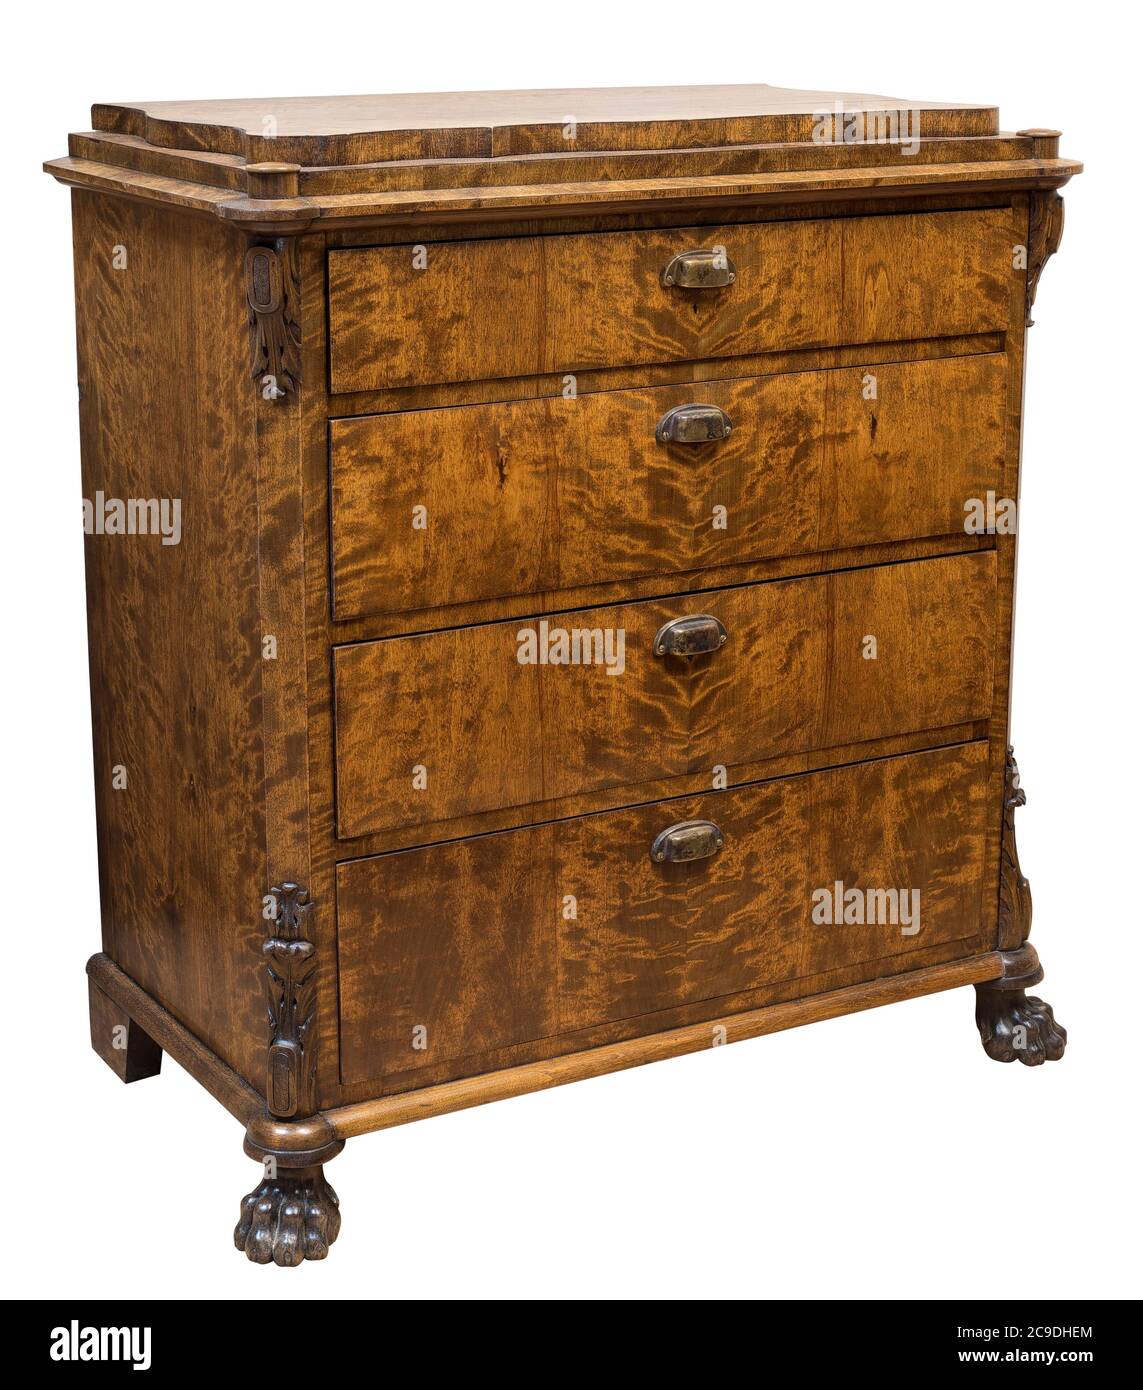 Old vintage antique chest of drawers on white background Stock Photo